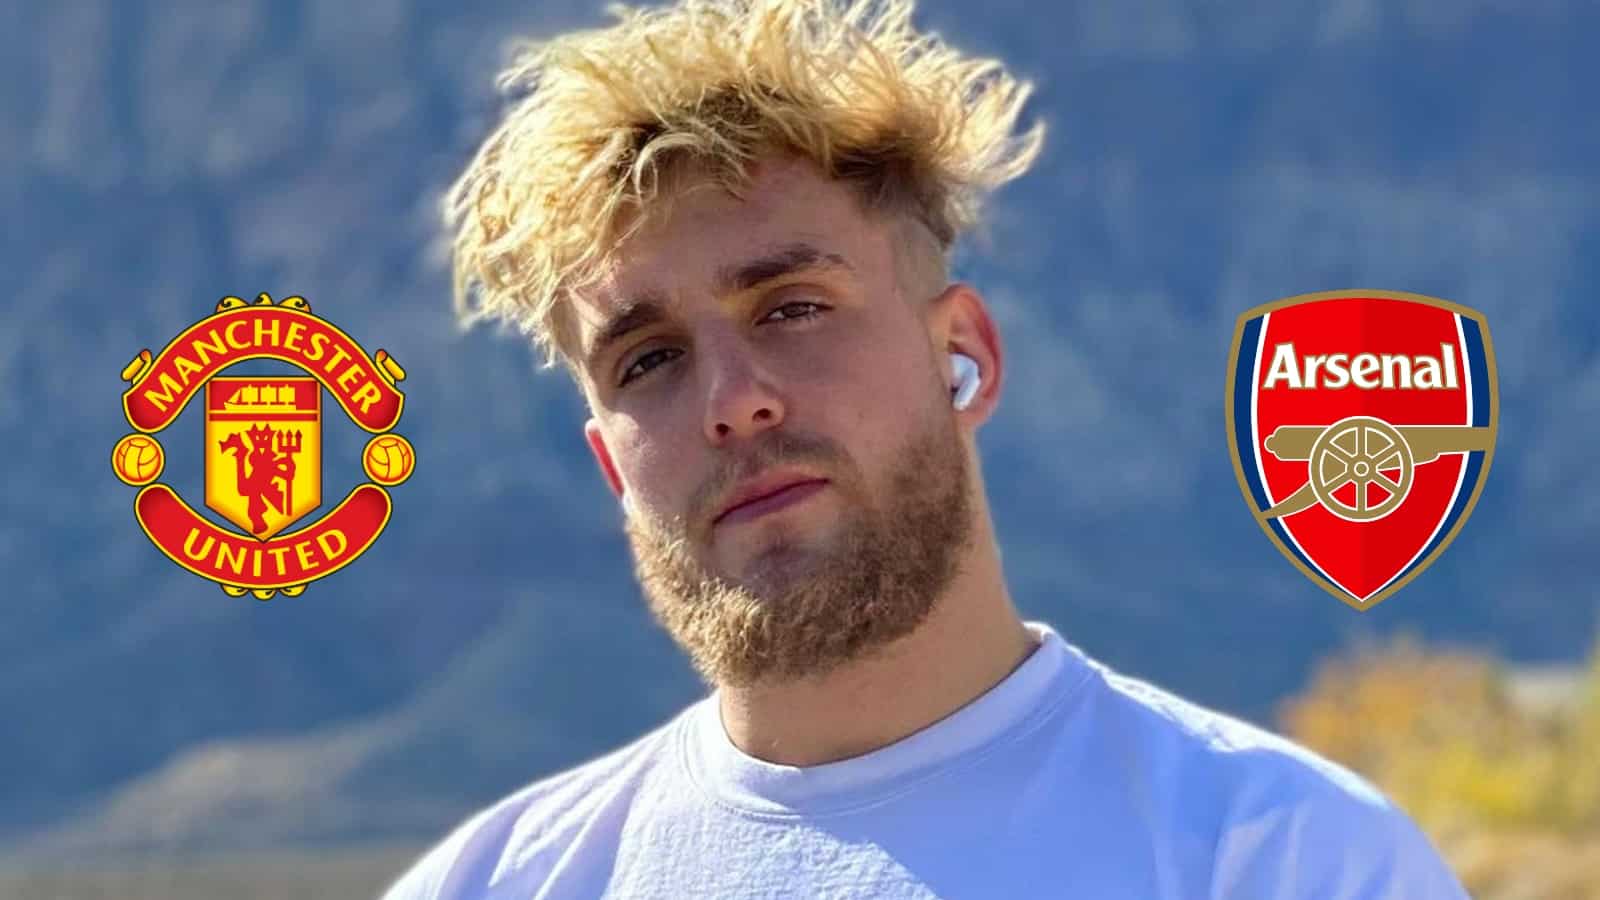 jake paul with manchester united crest and arsenal crest